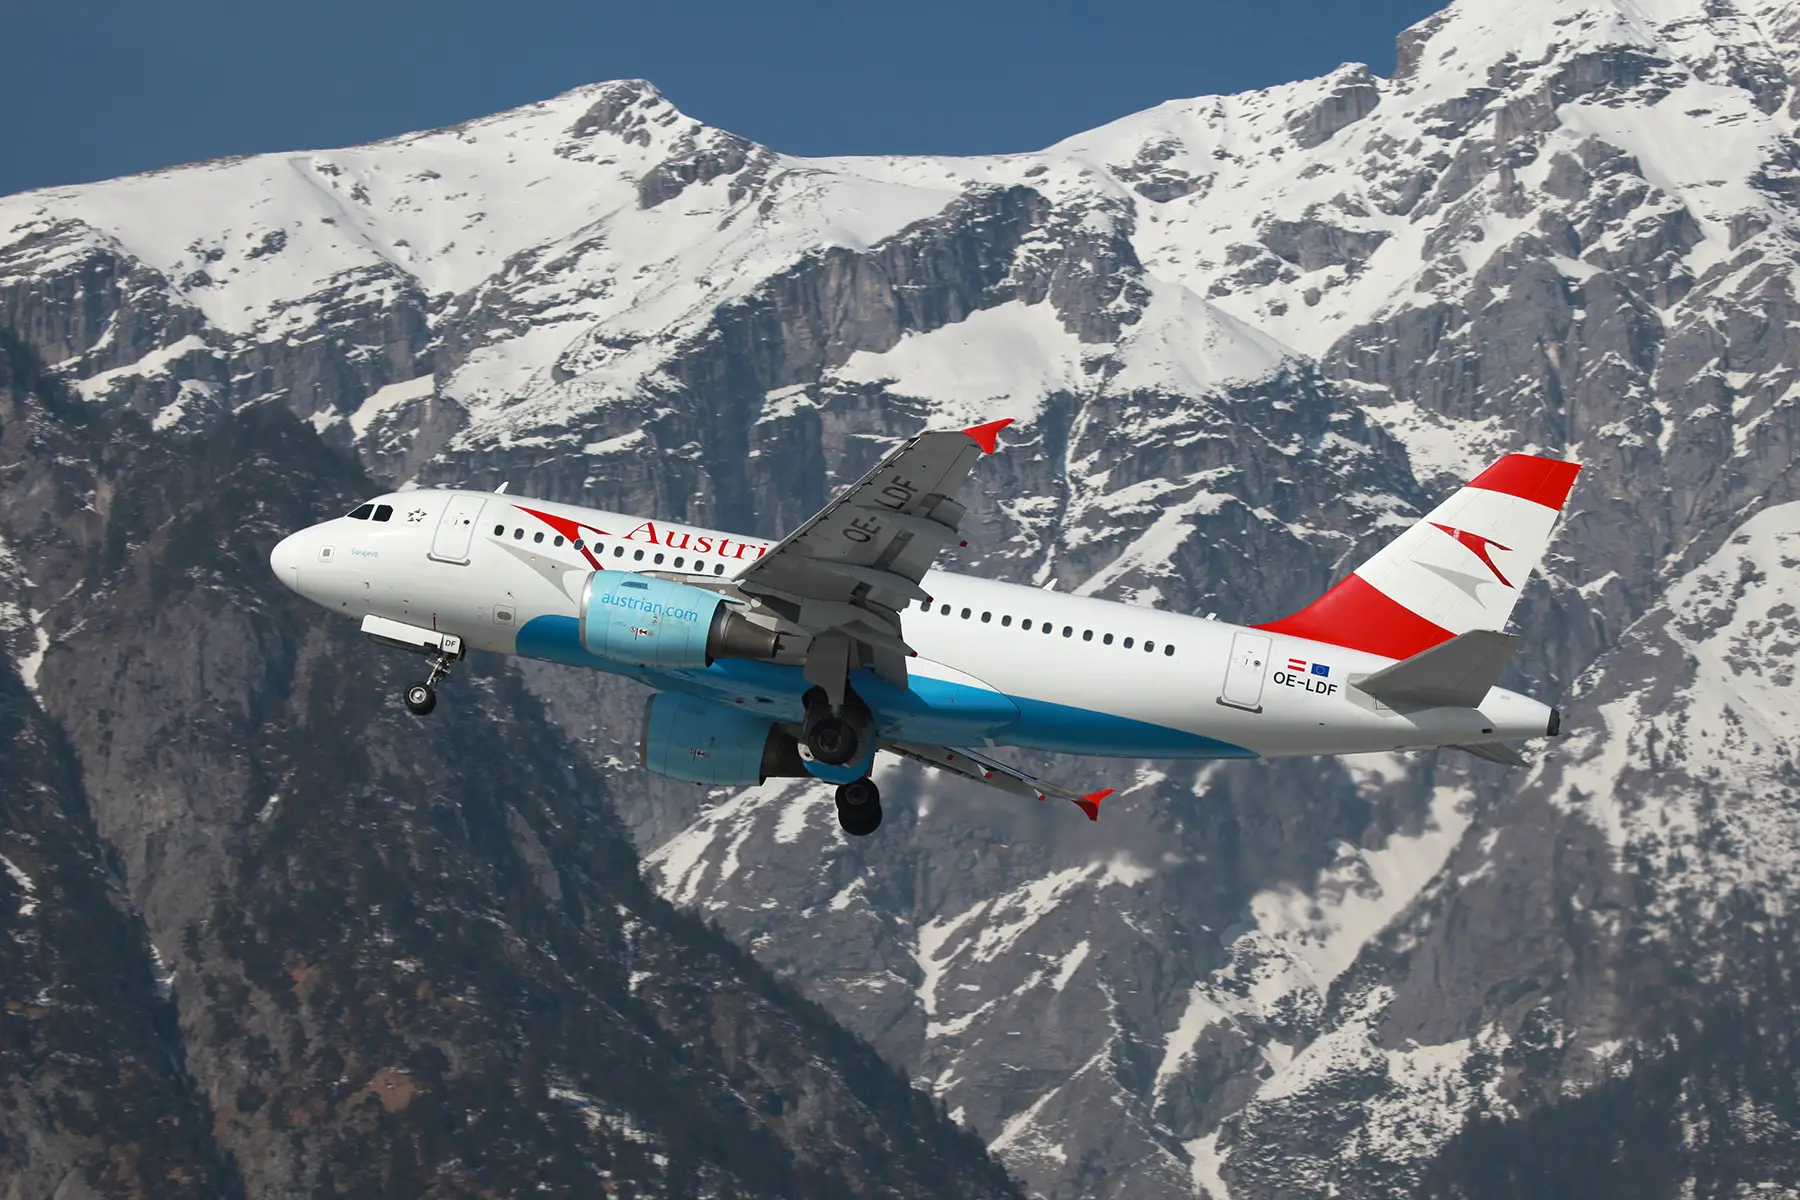 An Austrian Airlines airplane taking off from Innsbruck Airport against a mountain backdrop